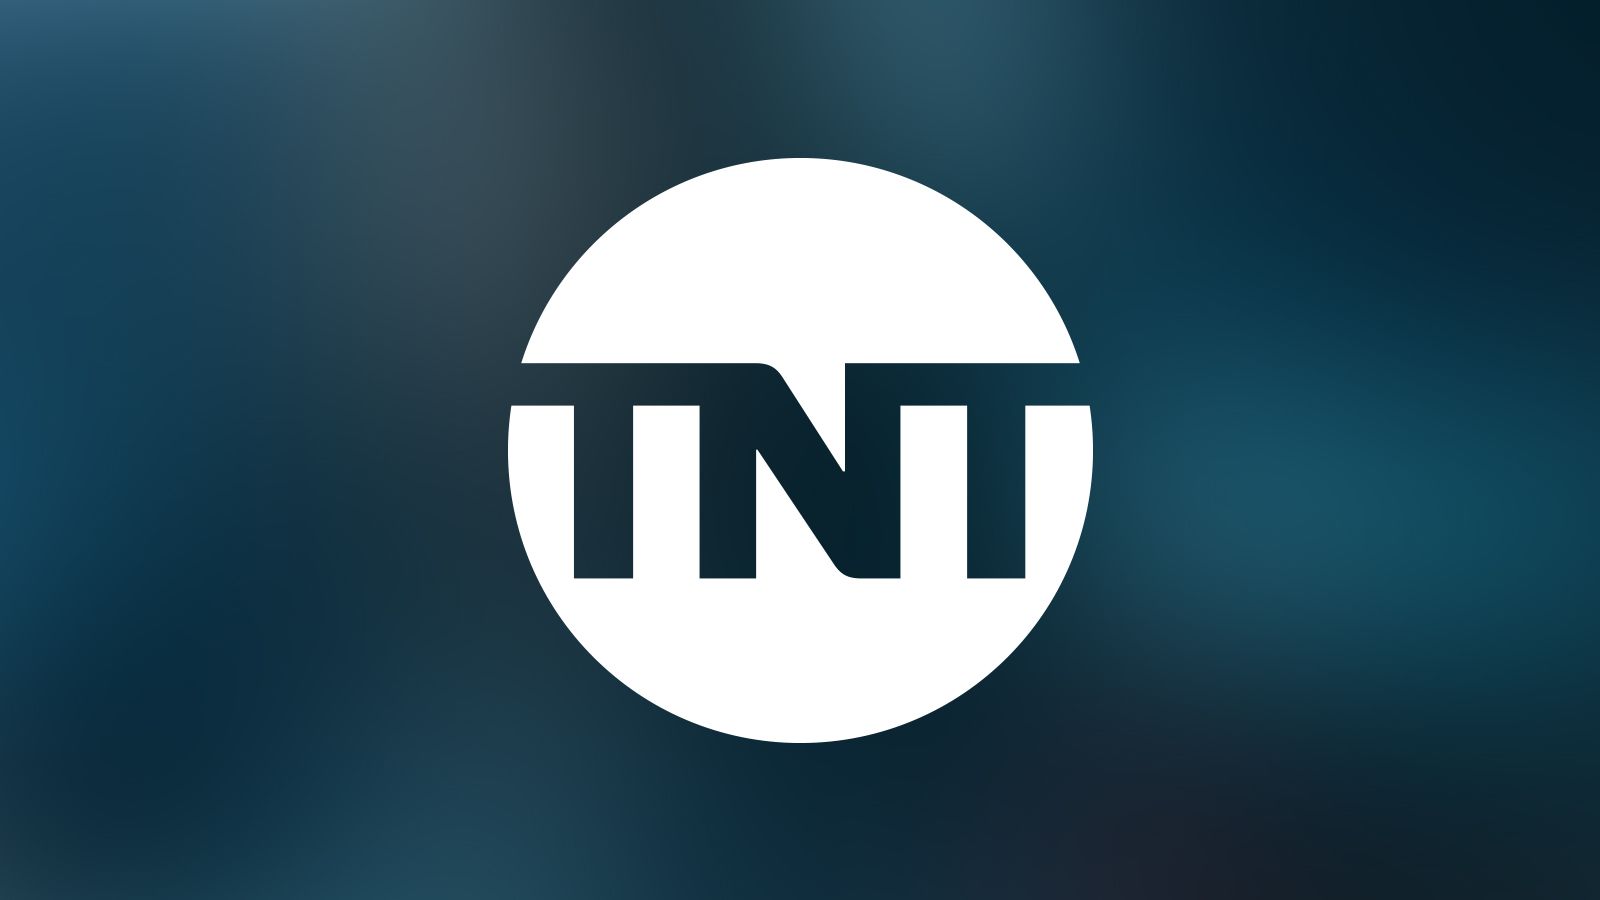 TNT logo with background